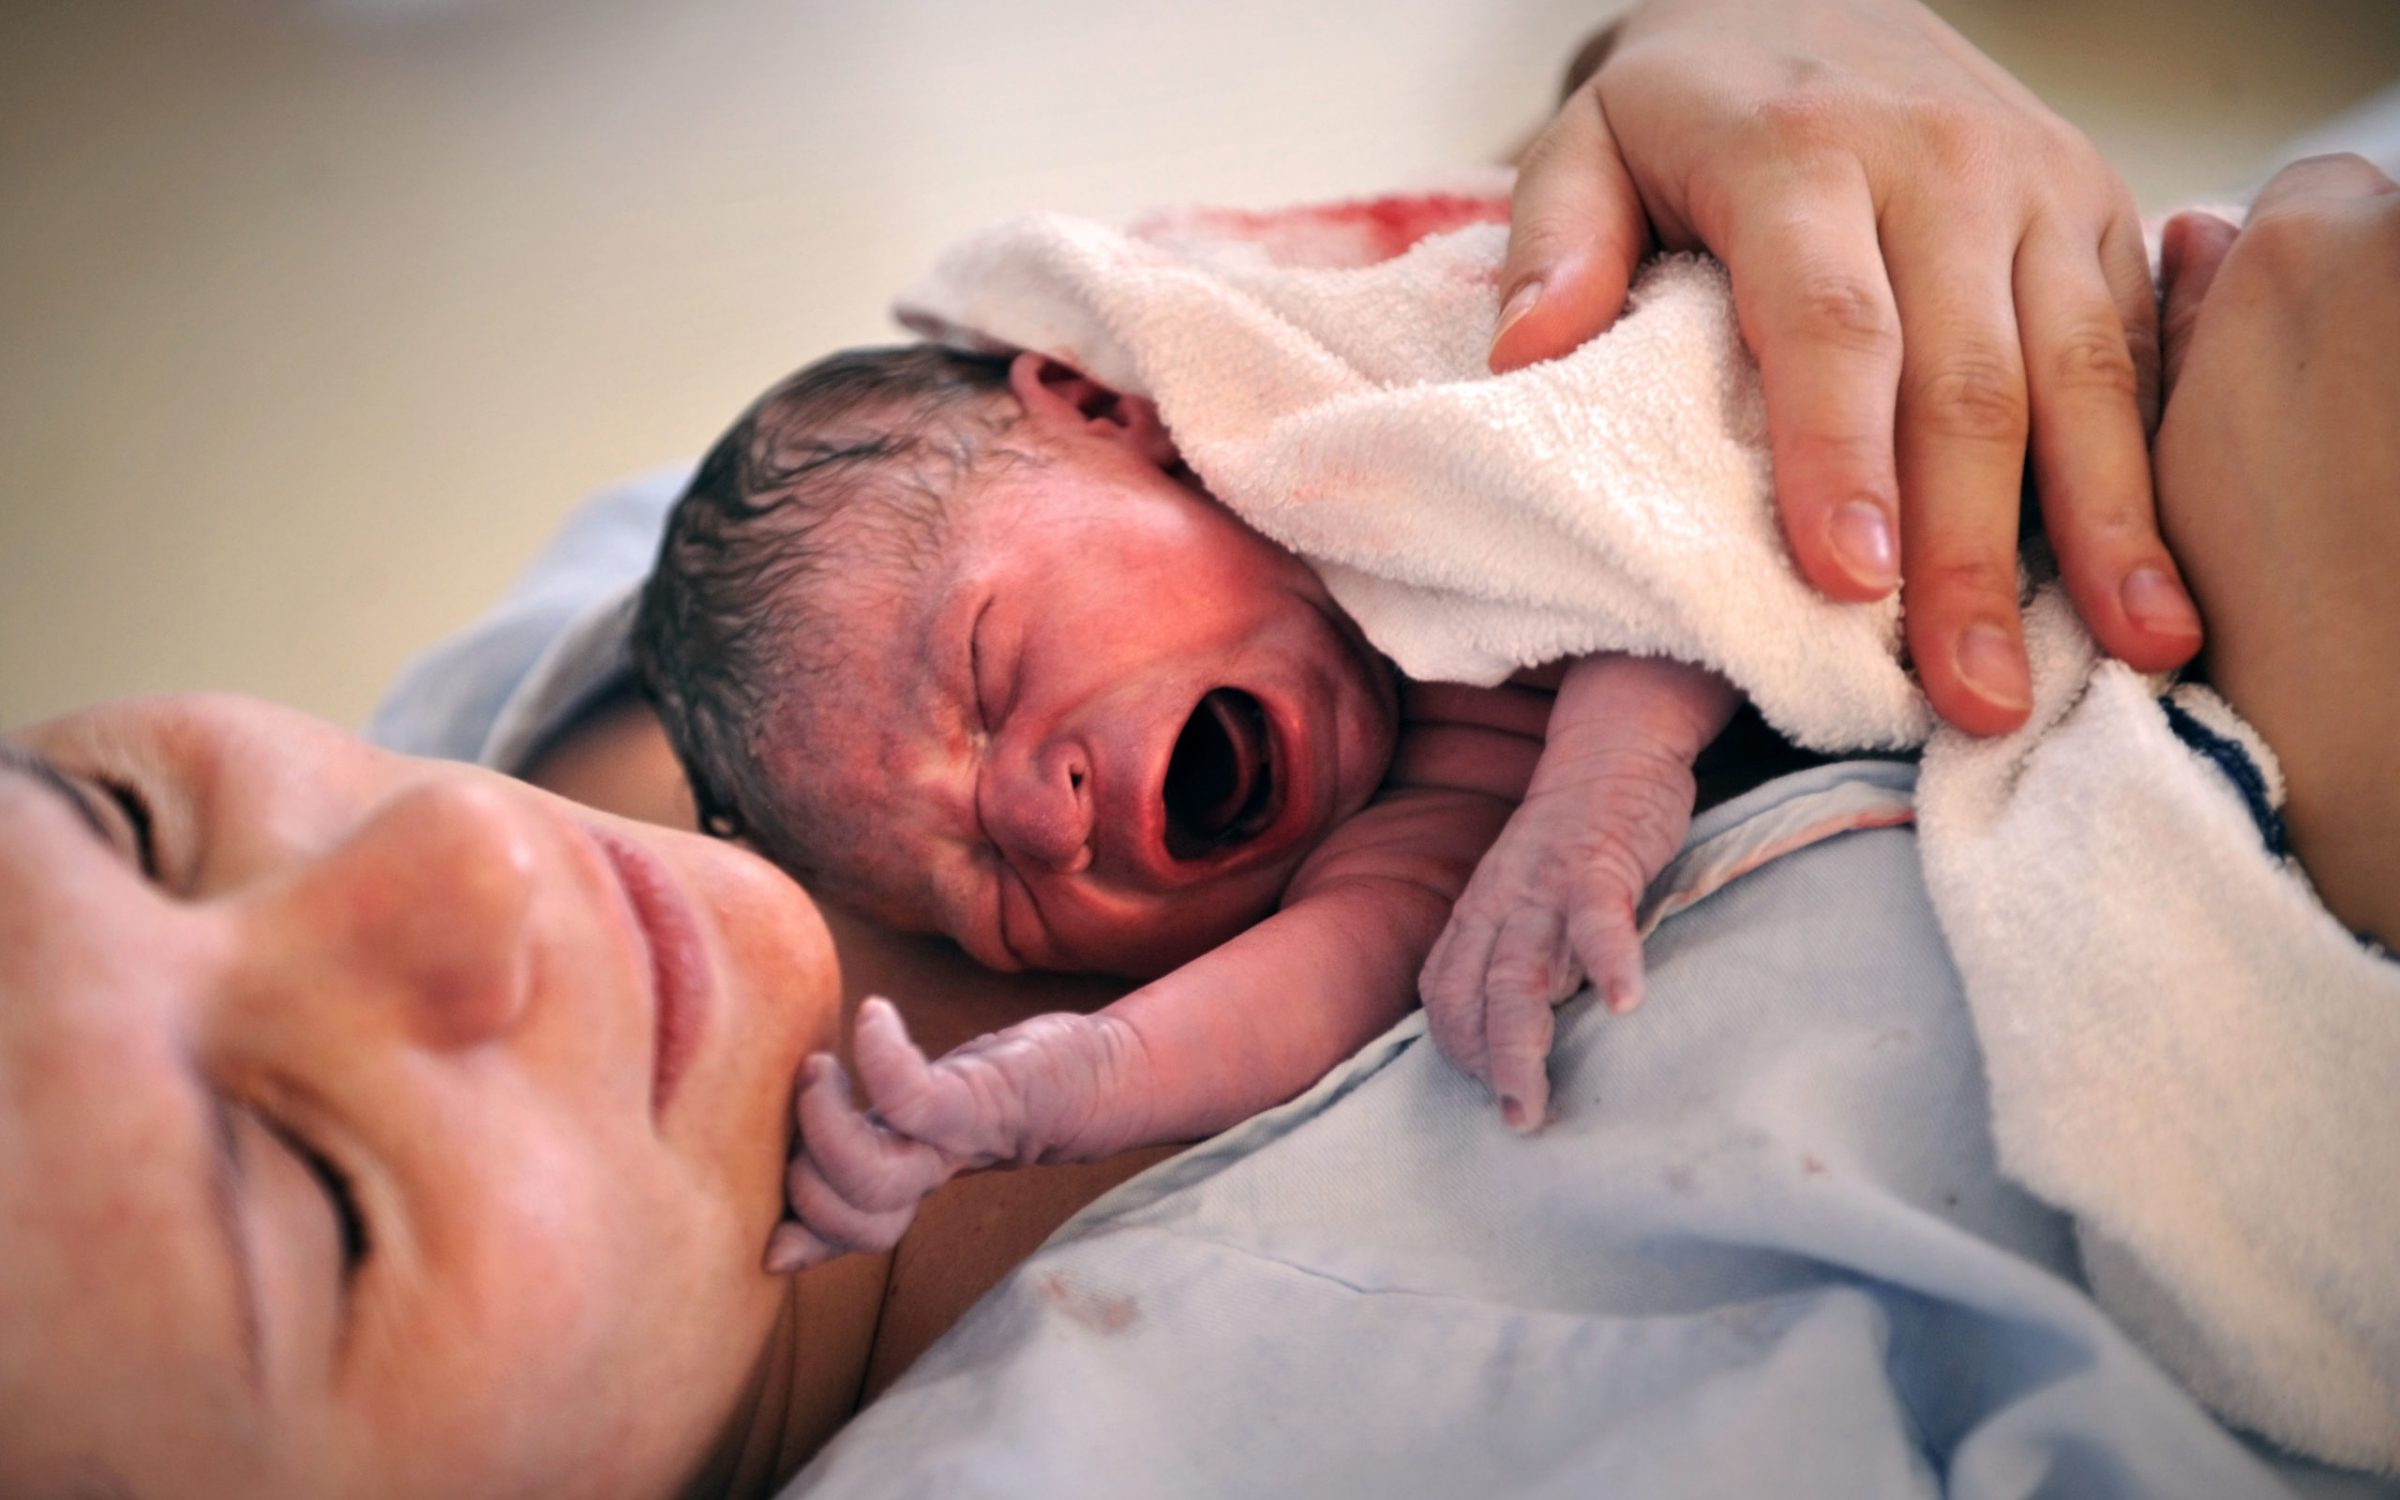 A newborn baby held by his mother.